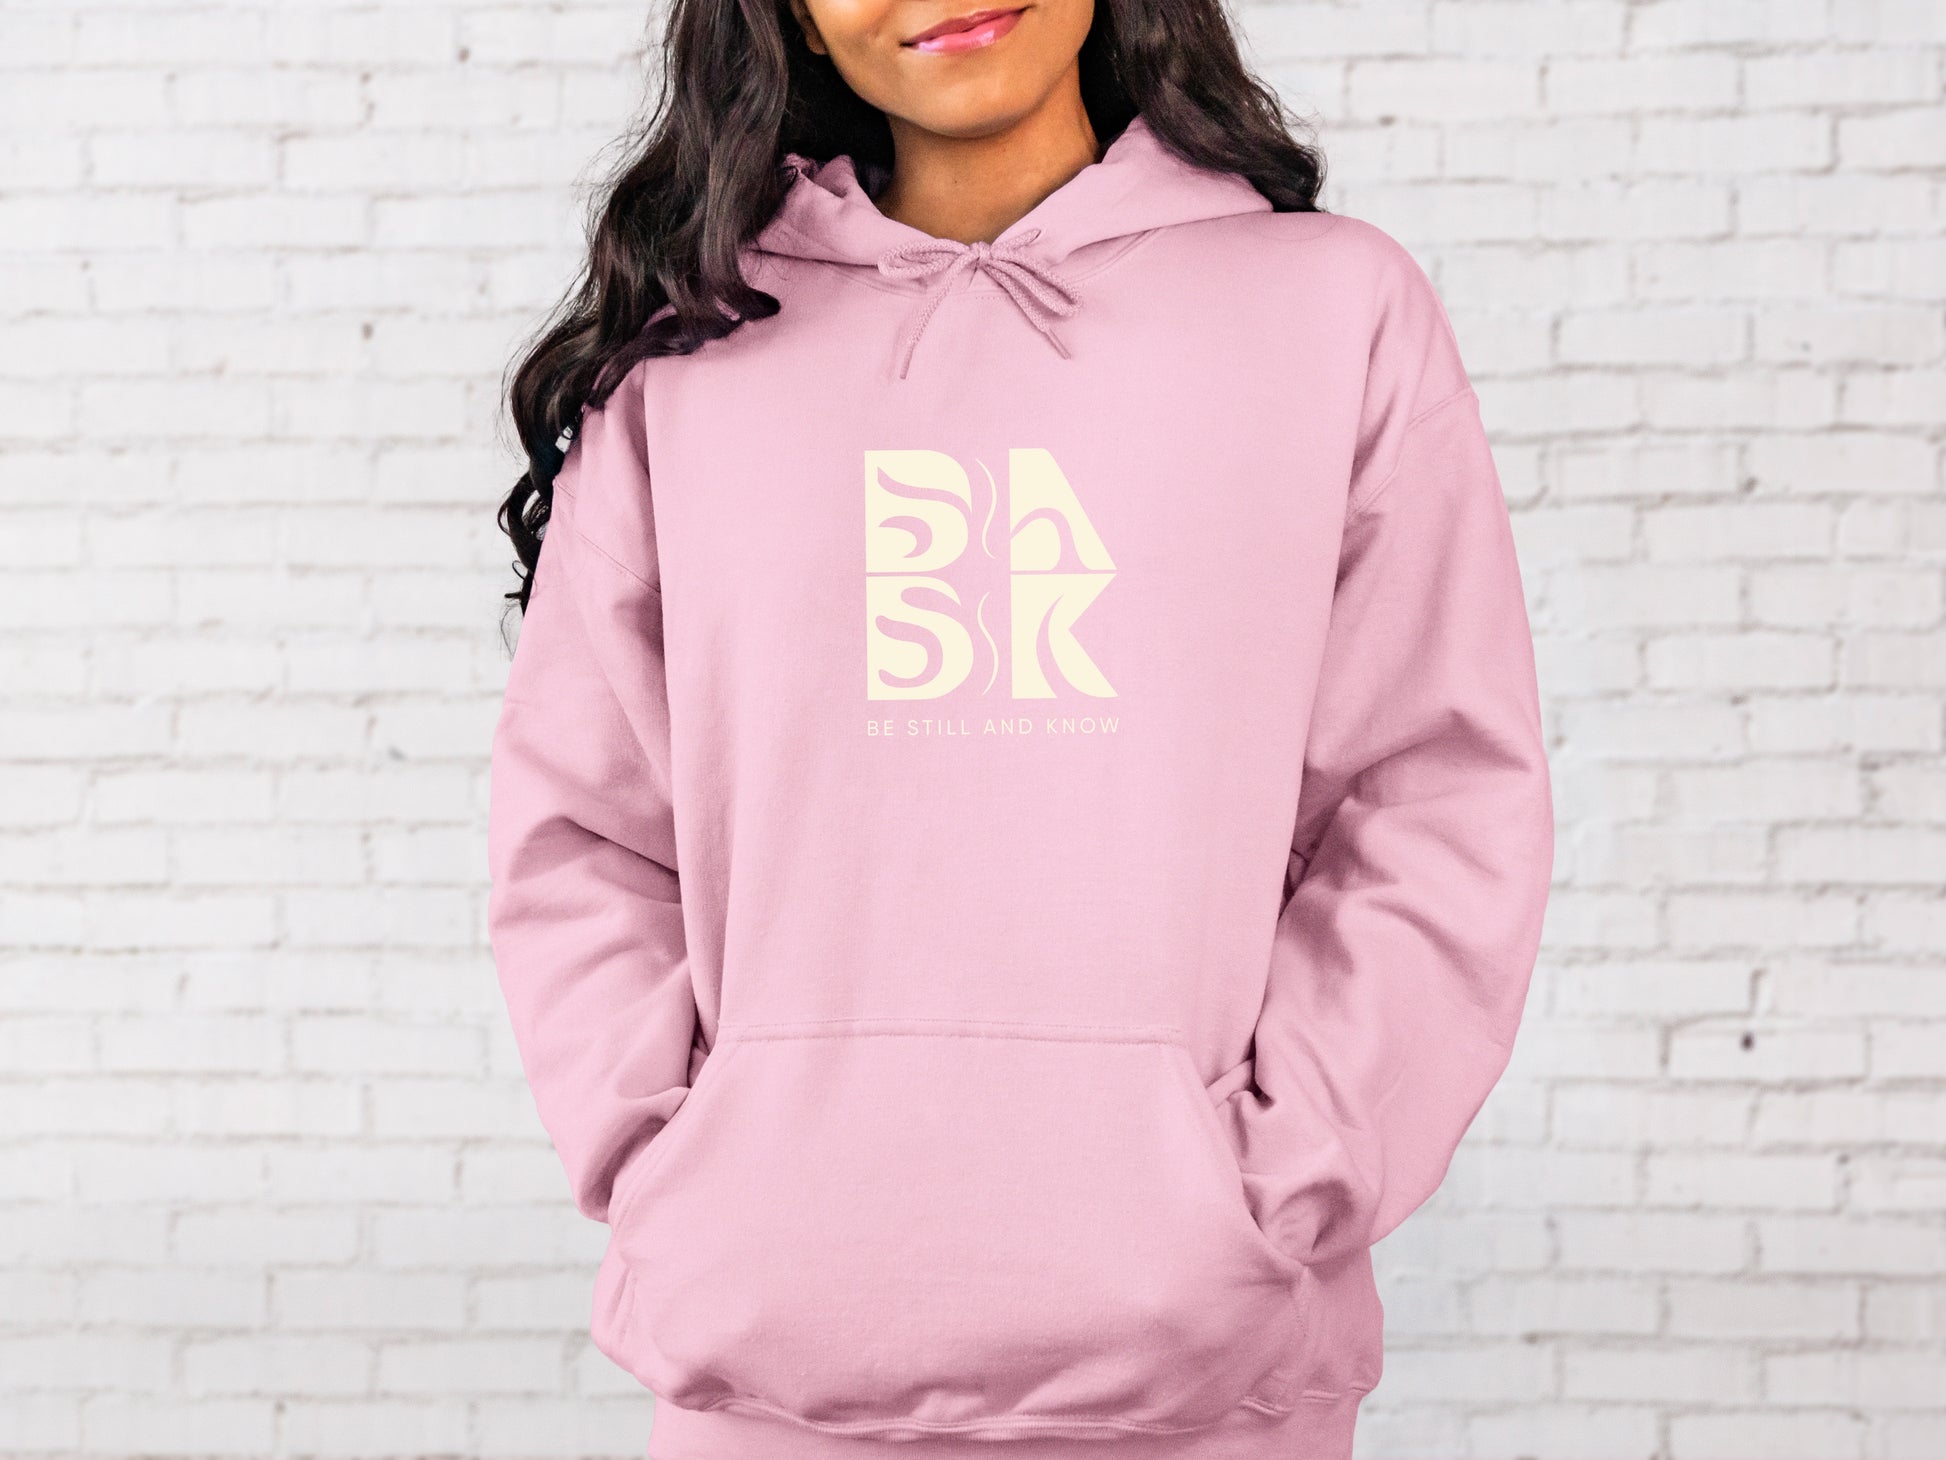 A woman wearing a Coastal Calm Hoodie in Light Pink by Be Still and Know, showcasing unique Christian Apparel.